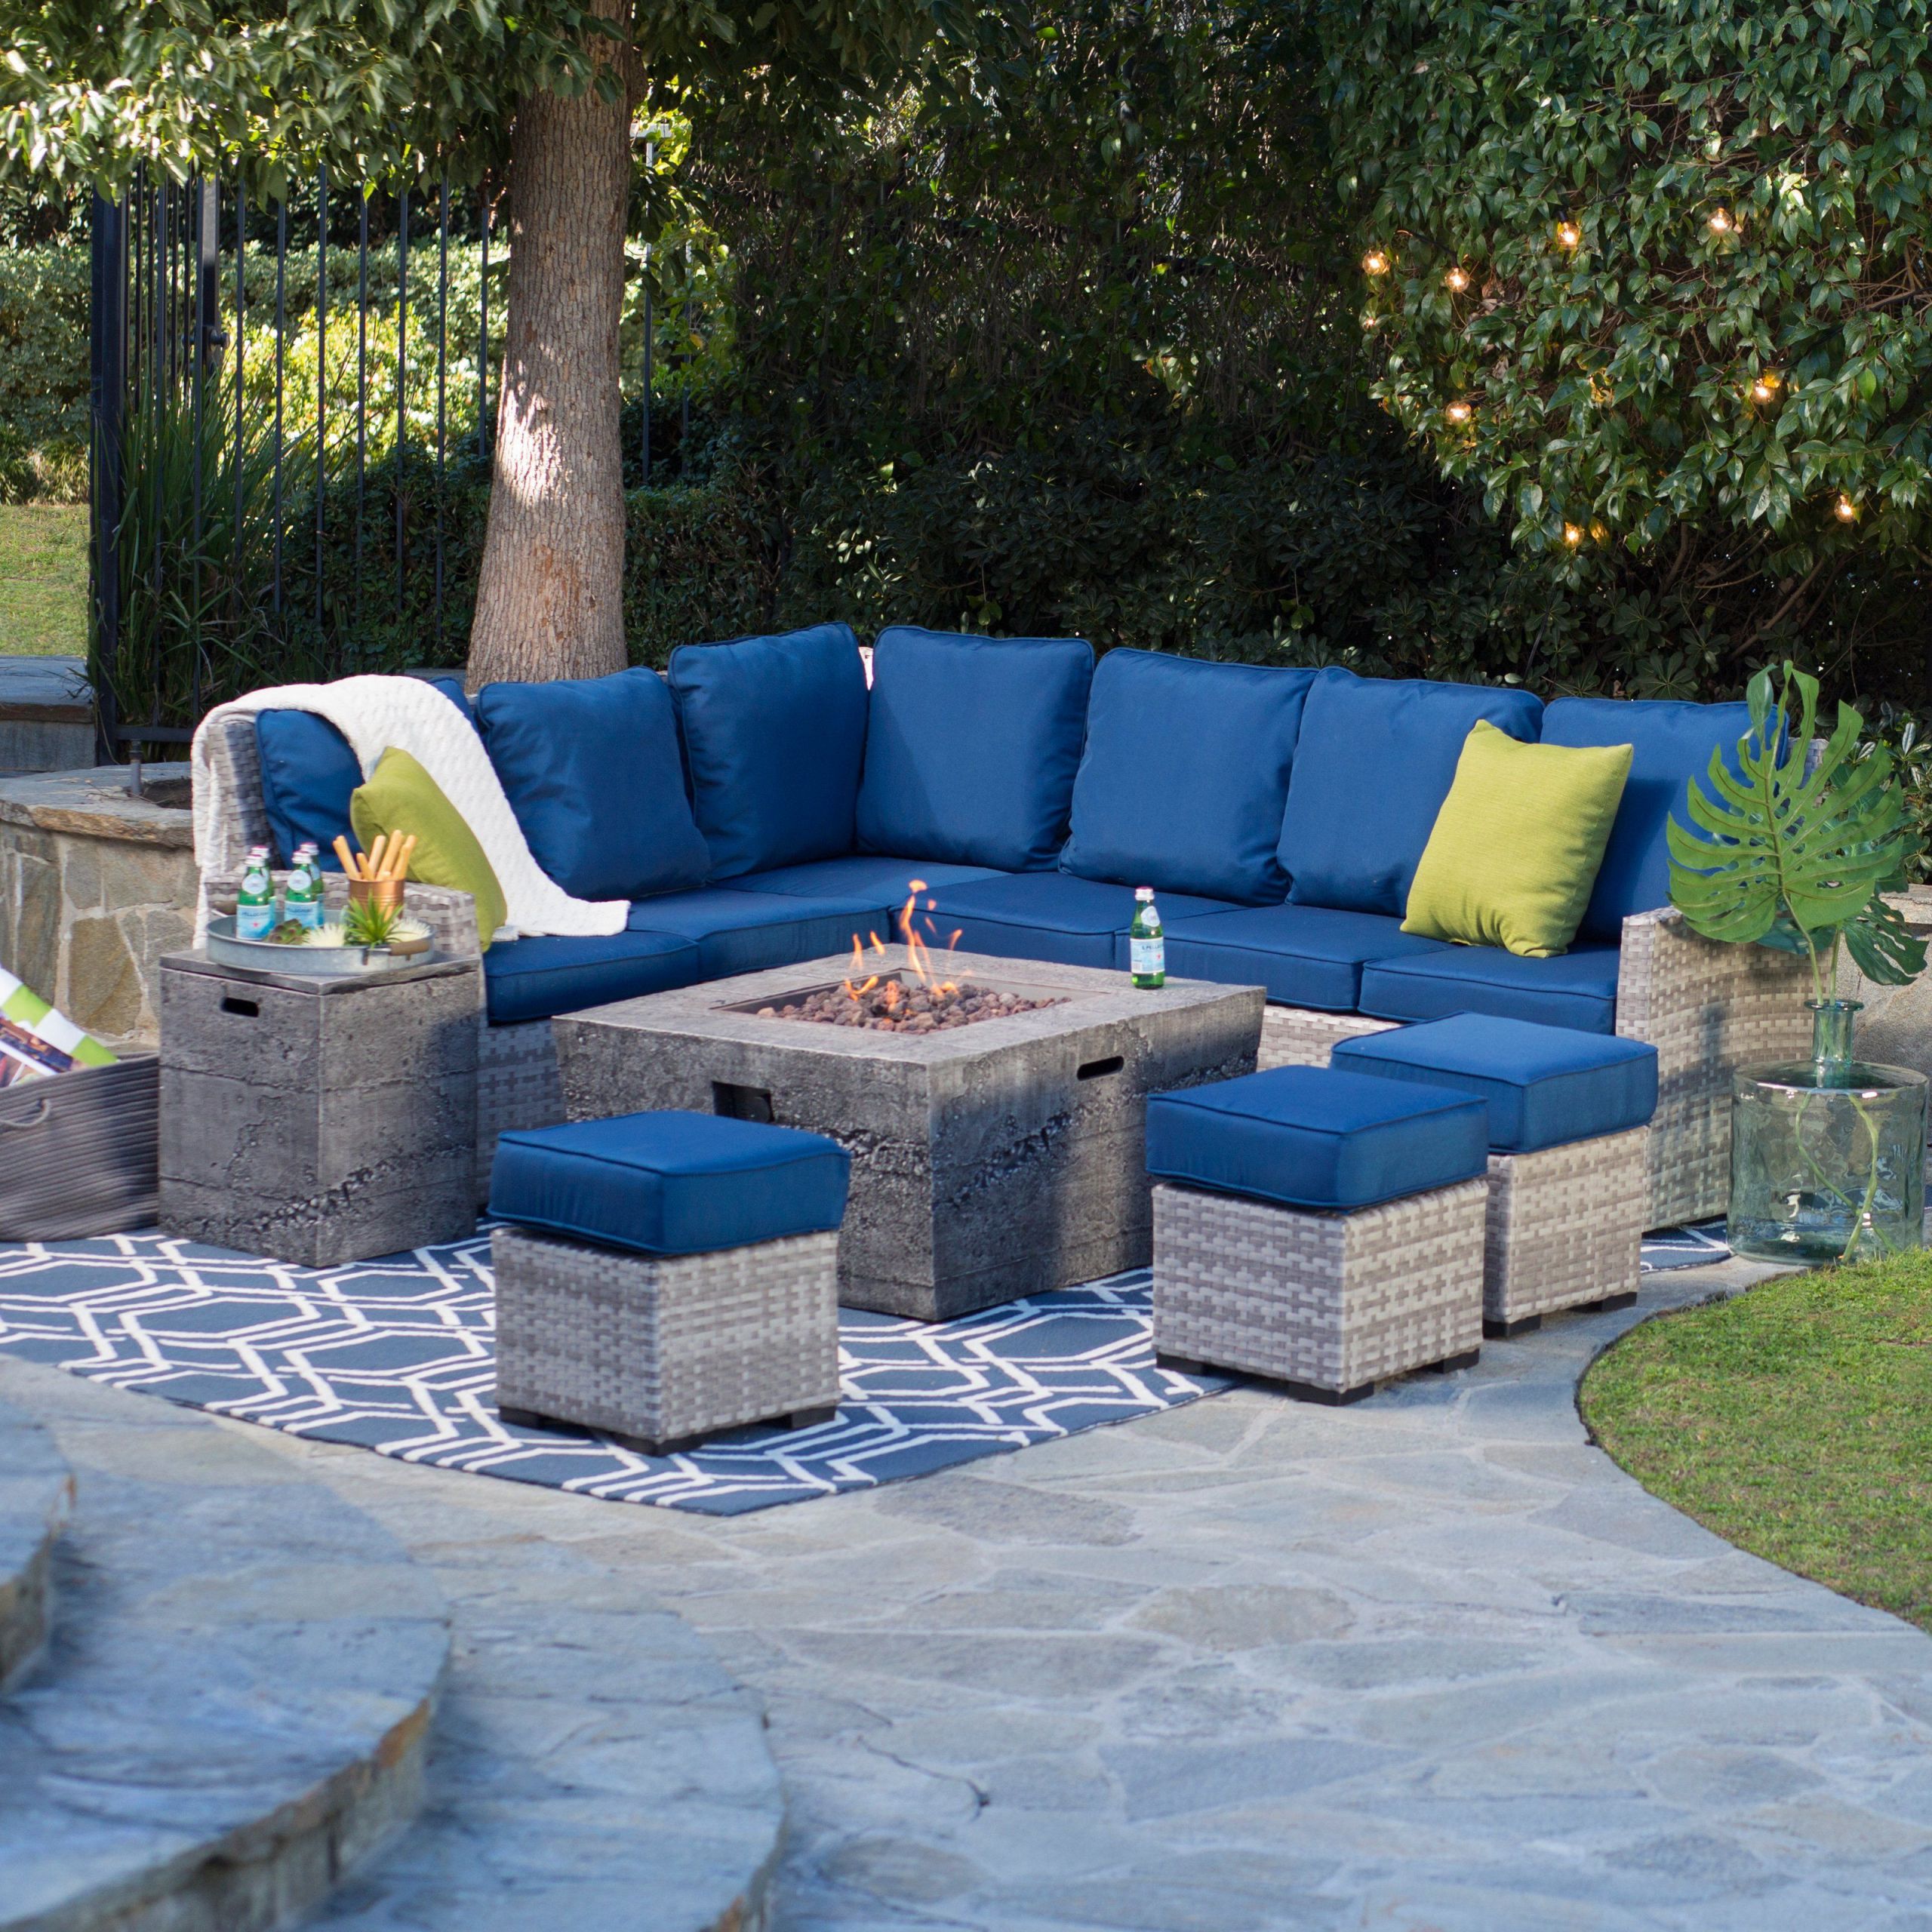 Outdoor Furniture With Fire Pits
 Belham Living Brookville All Weather Wicker Fire Pit Chat